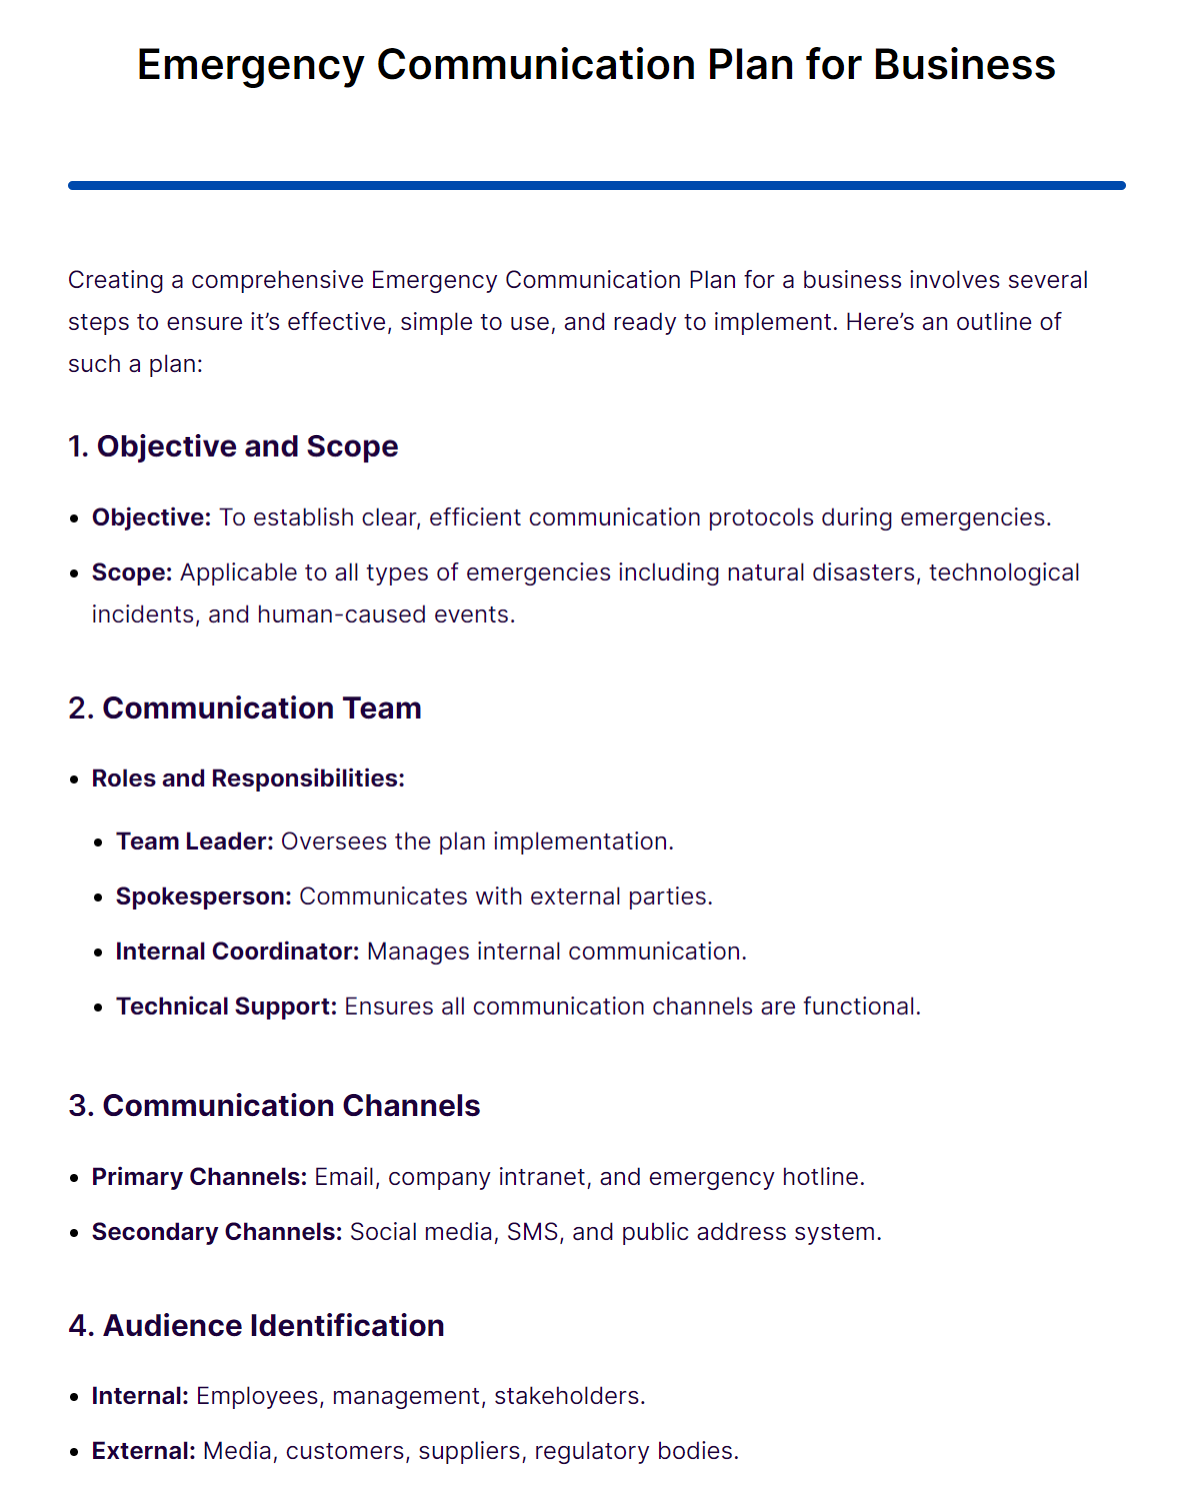 emergency communication plan for business1